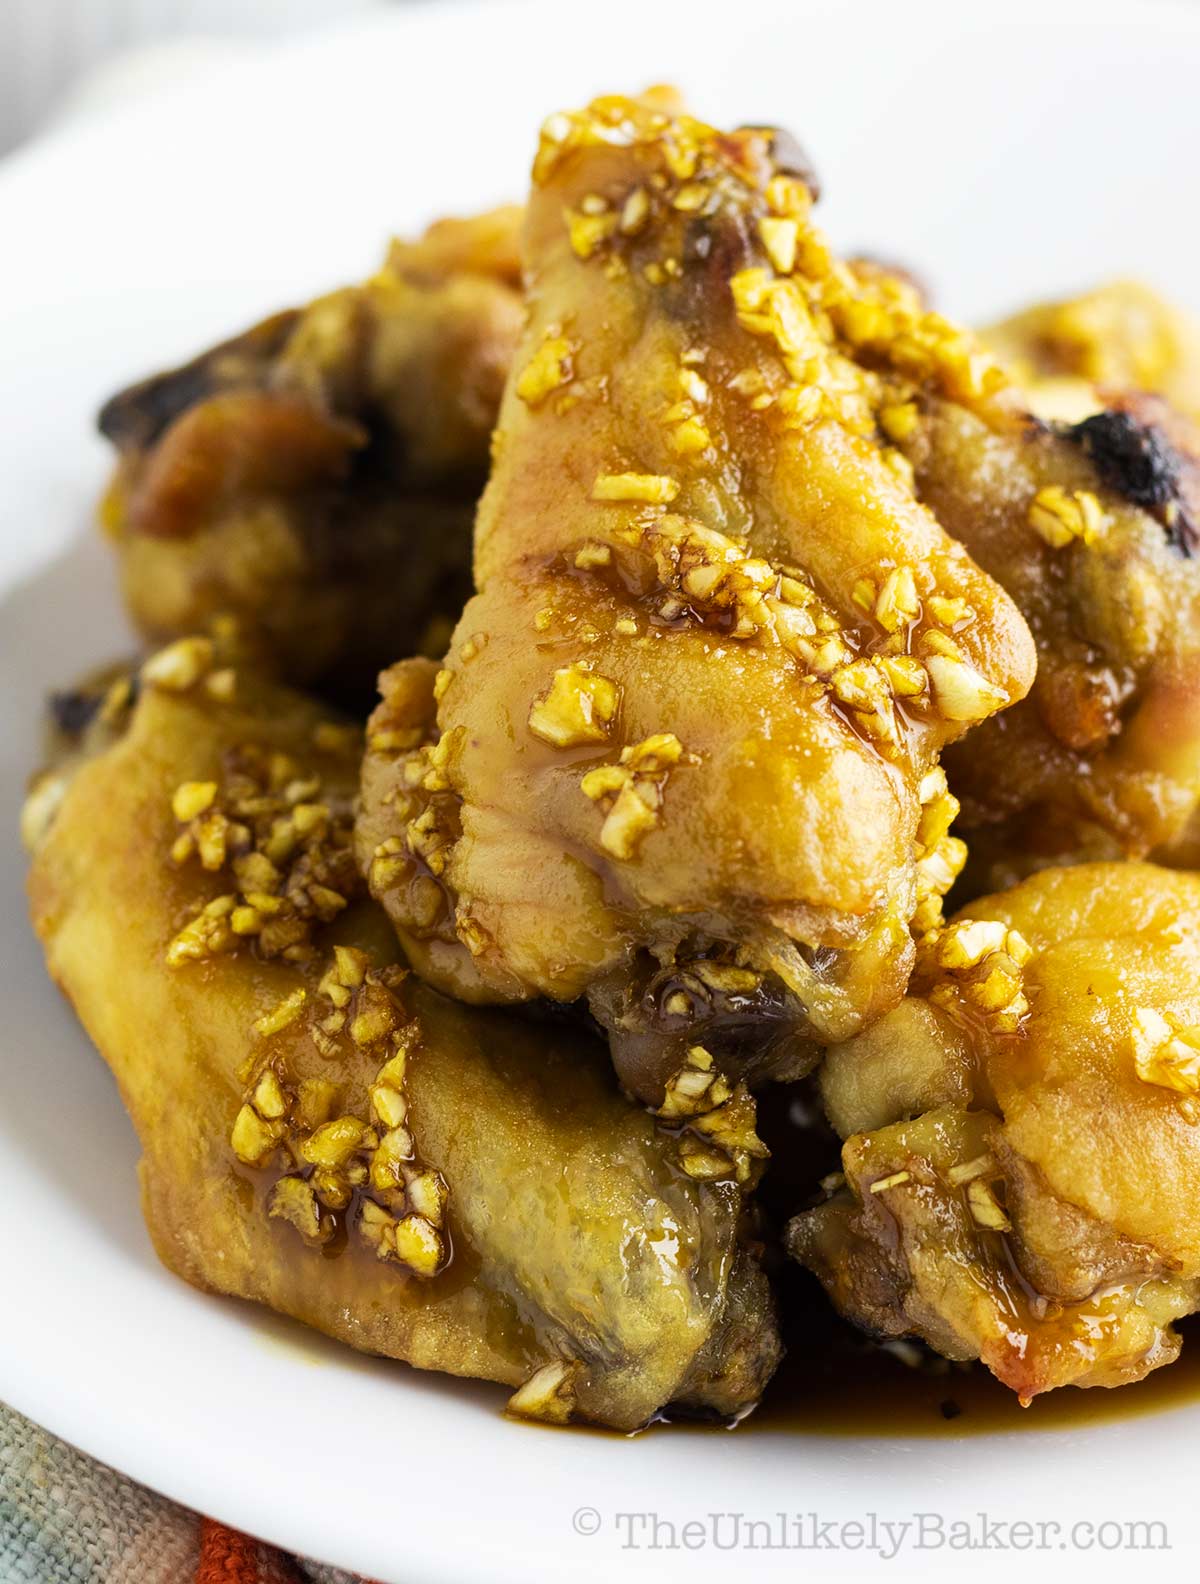 Asian Baked Chicken Wings on a Plate